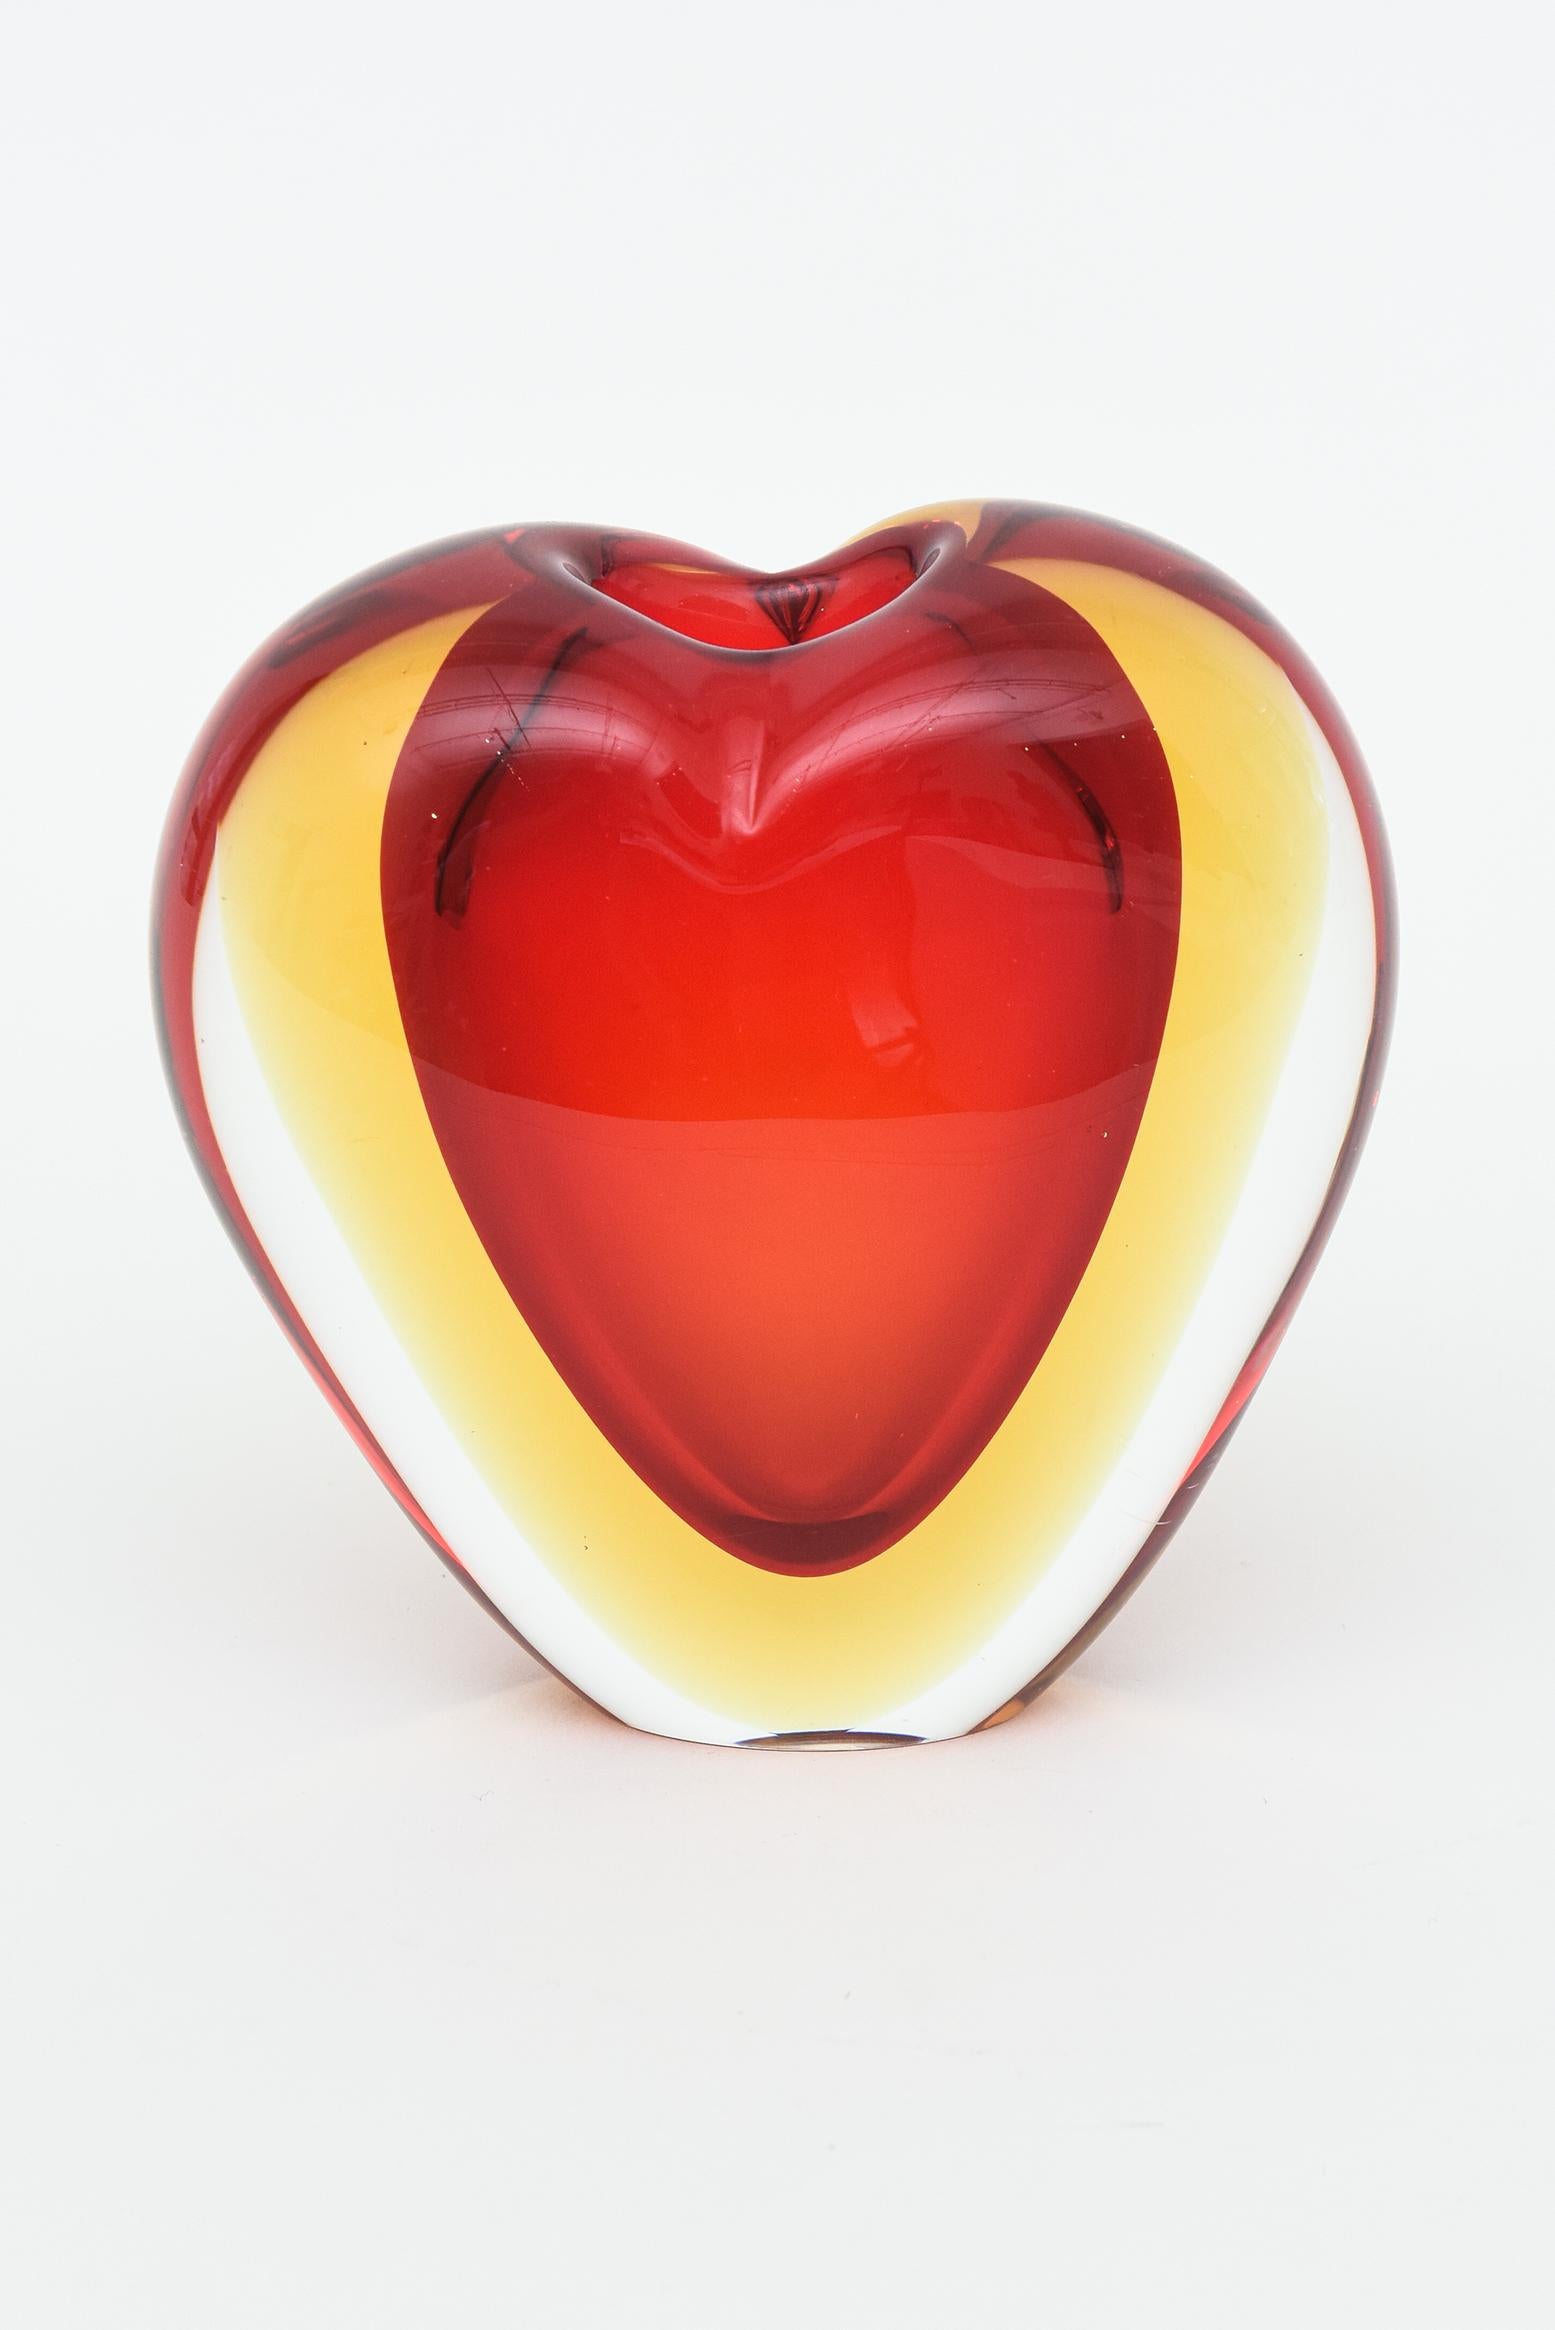 Vintage Murano Antonio da Ros for Cenedese Red, Yellow Sommerso Heart Vase For Sale 4